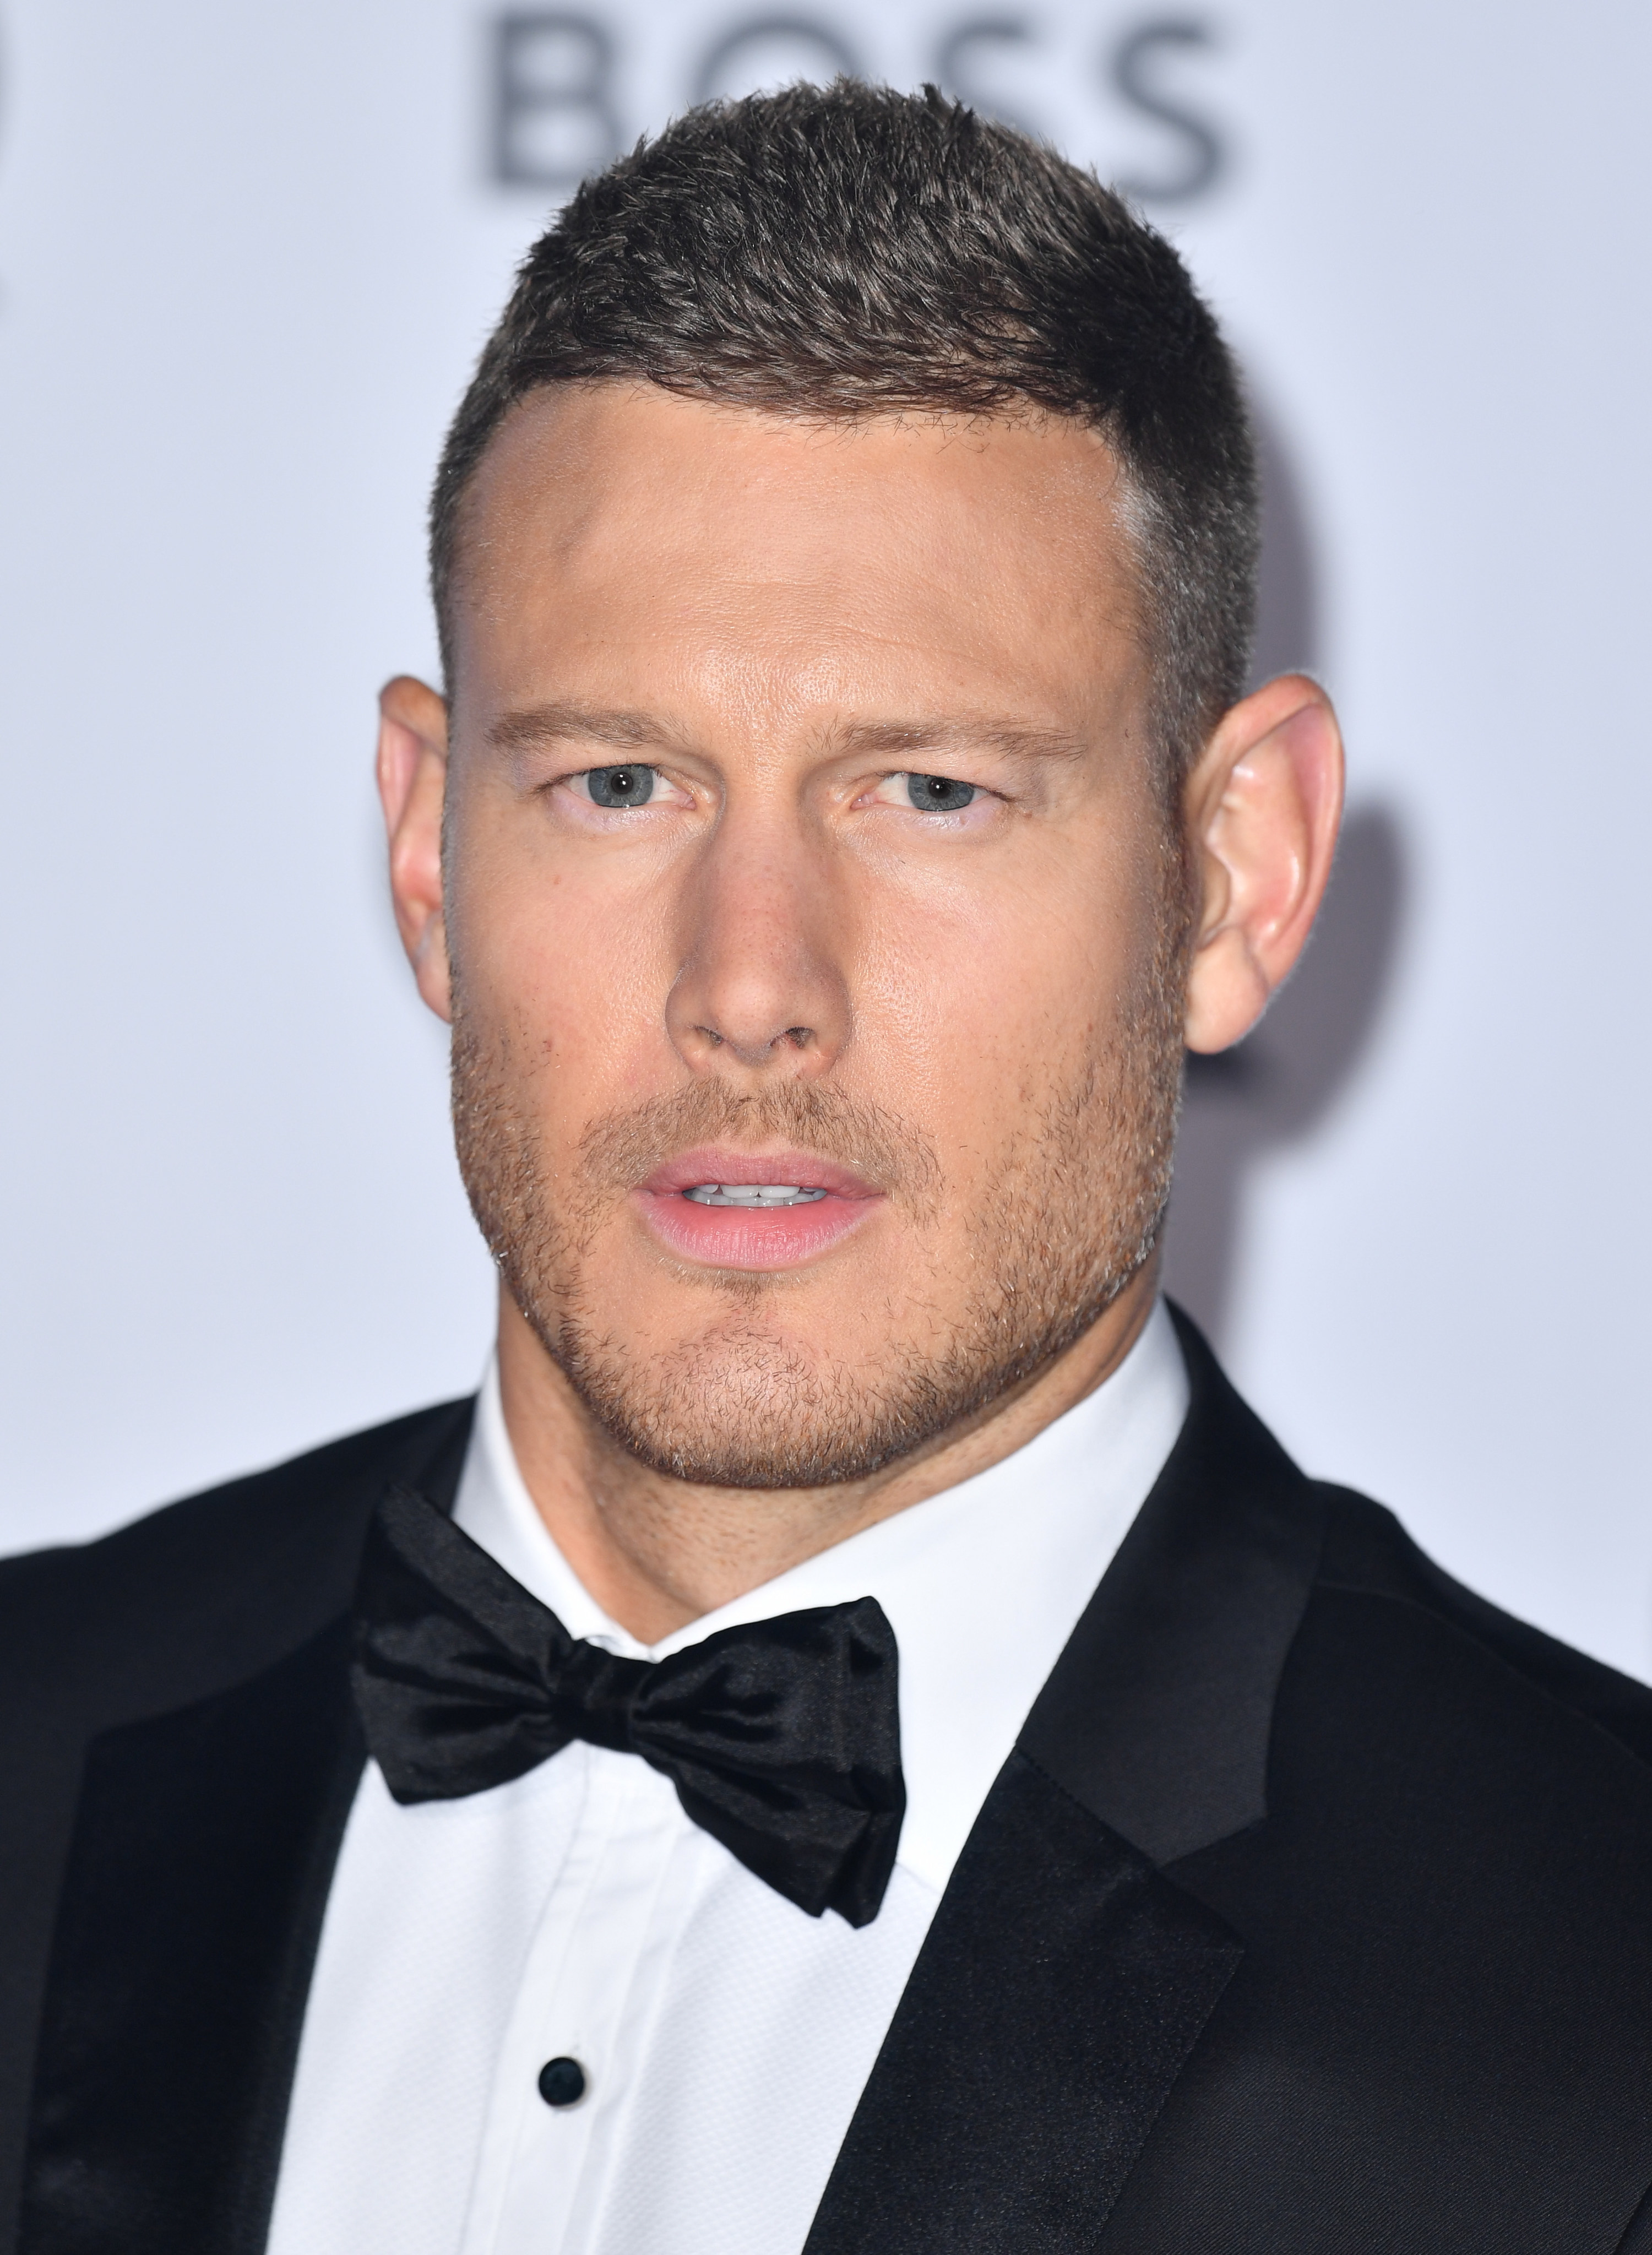 Tom Hopper cleans up well for a red carpet event